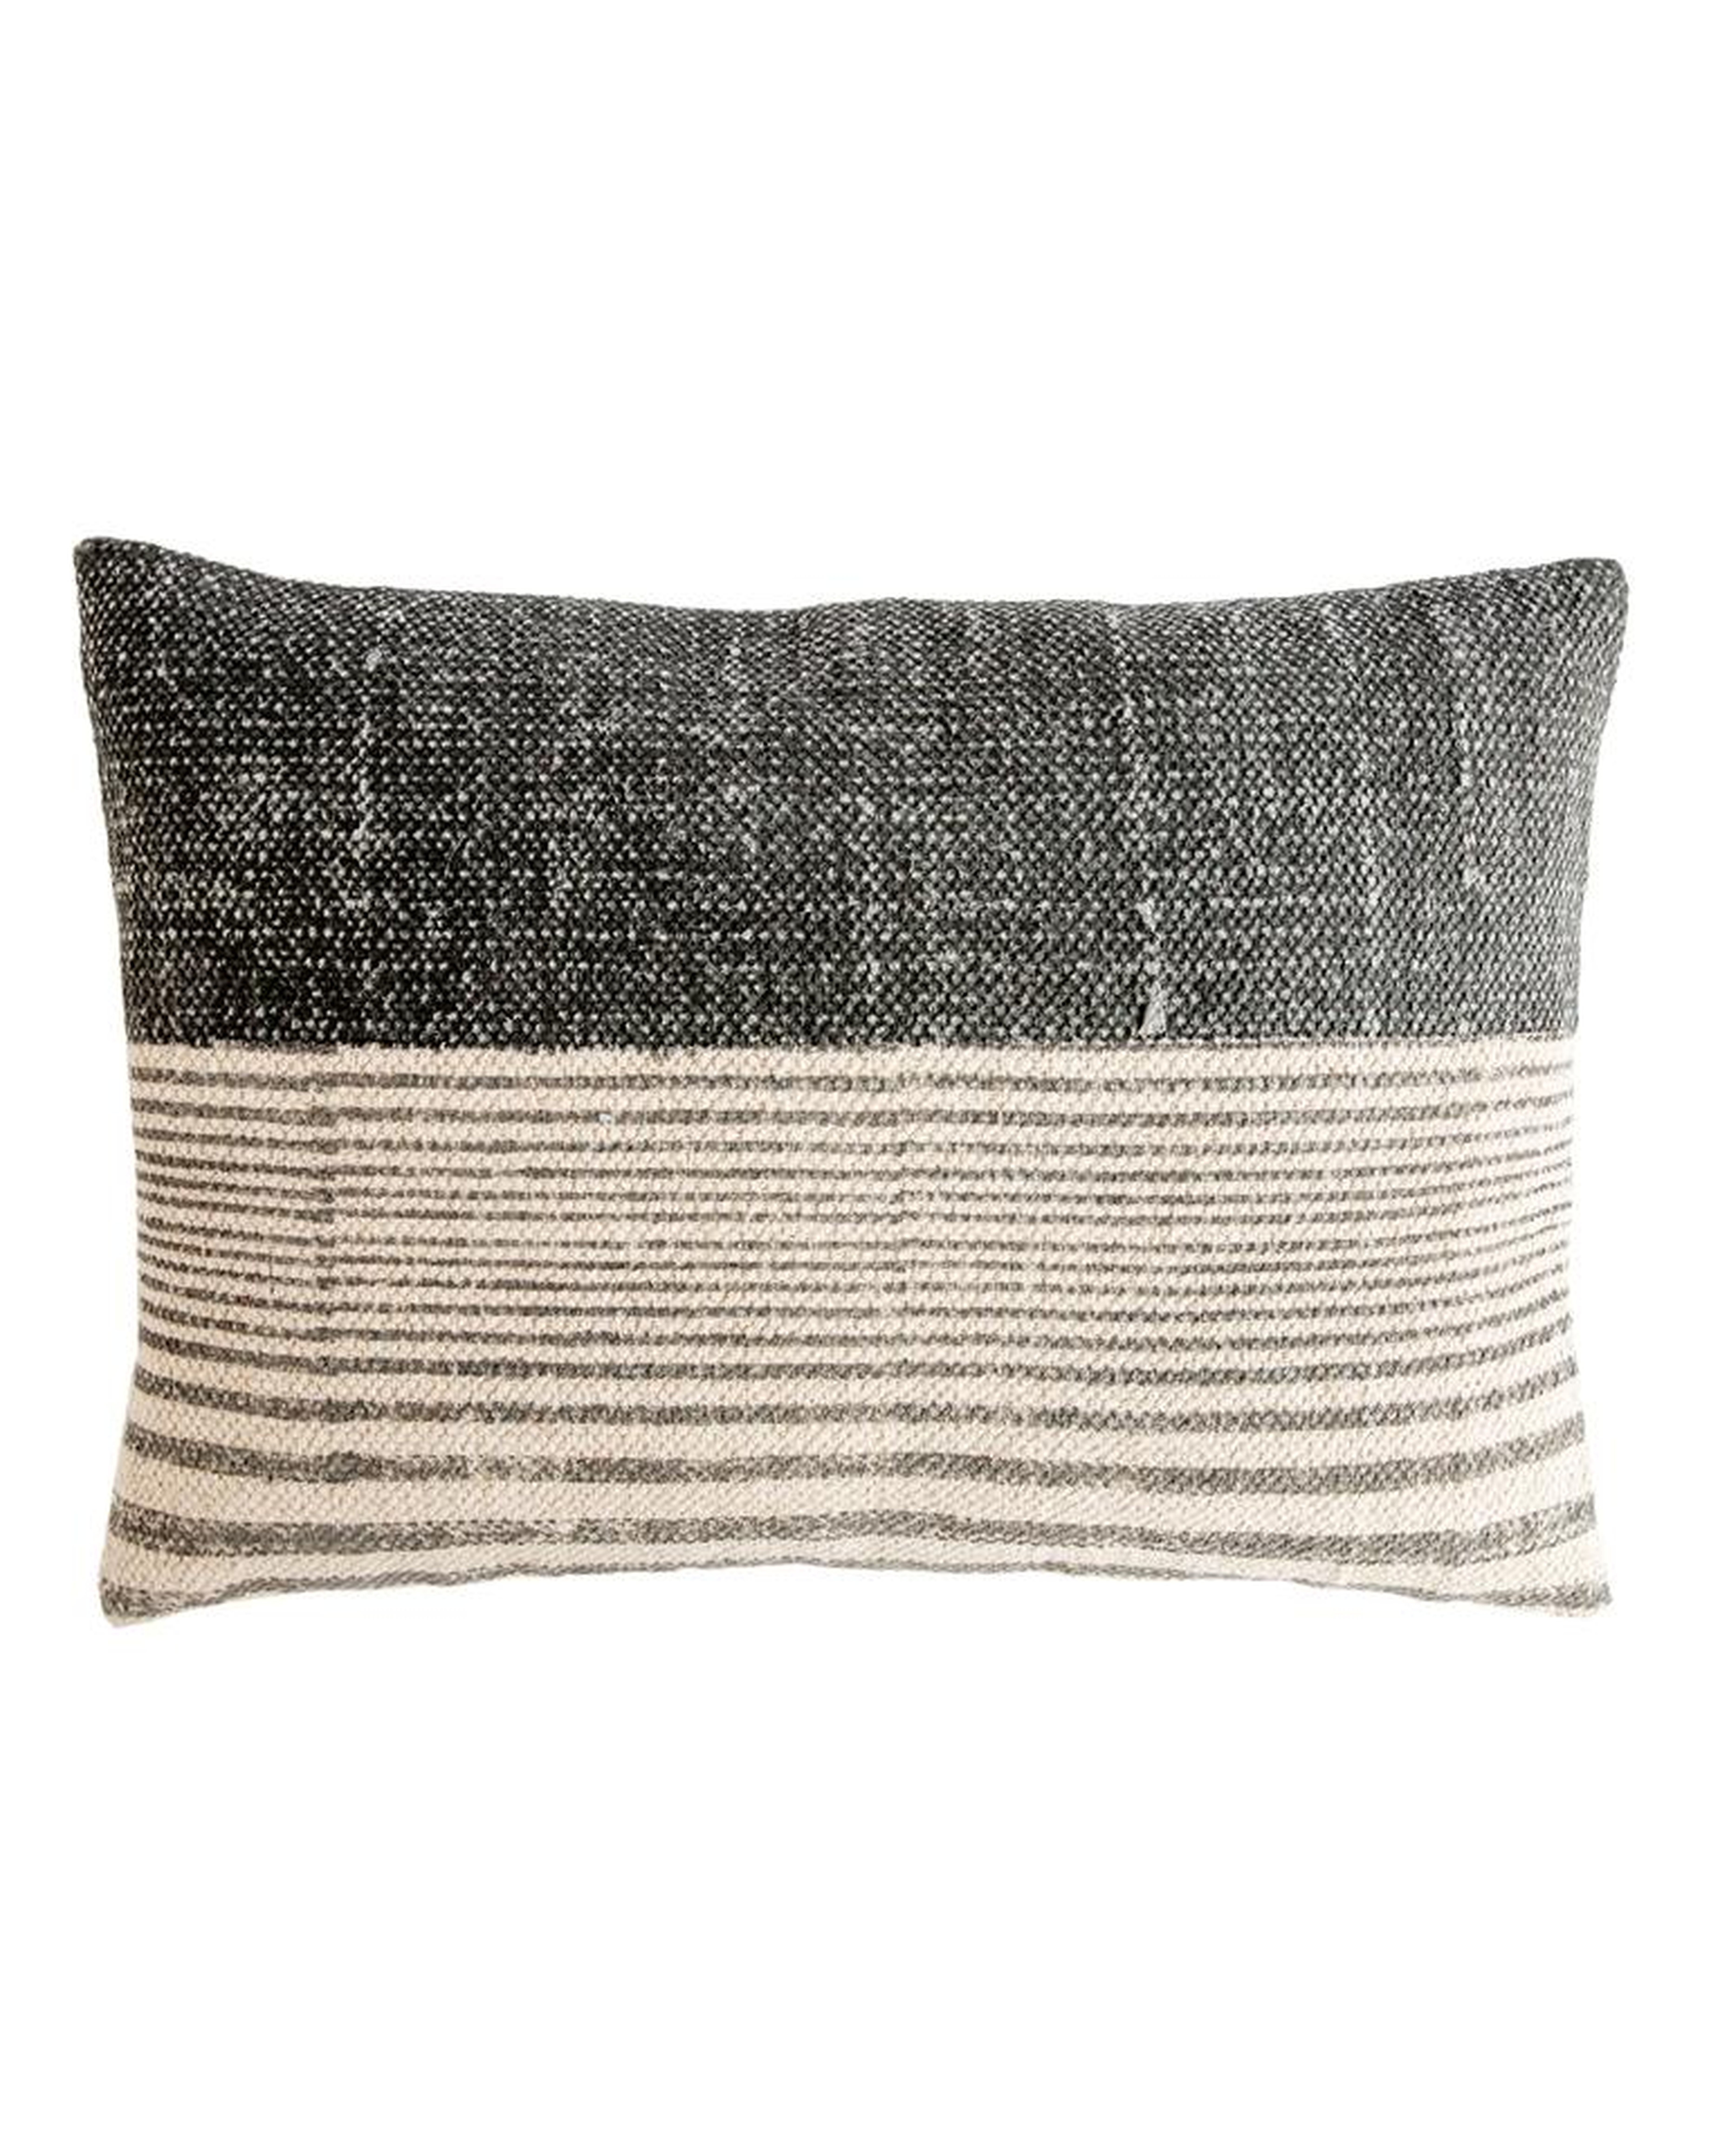 SUMA PILLOW WITH INSERT - McGee & Co.